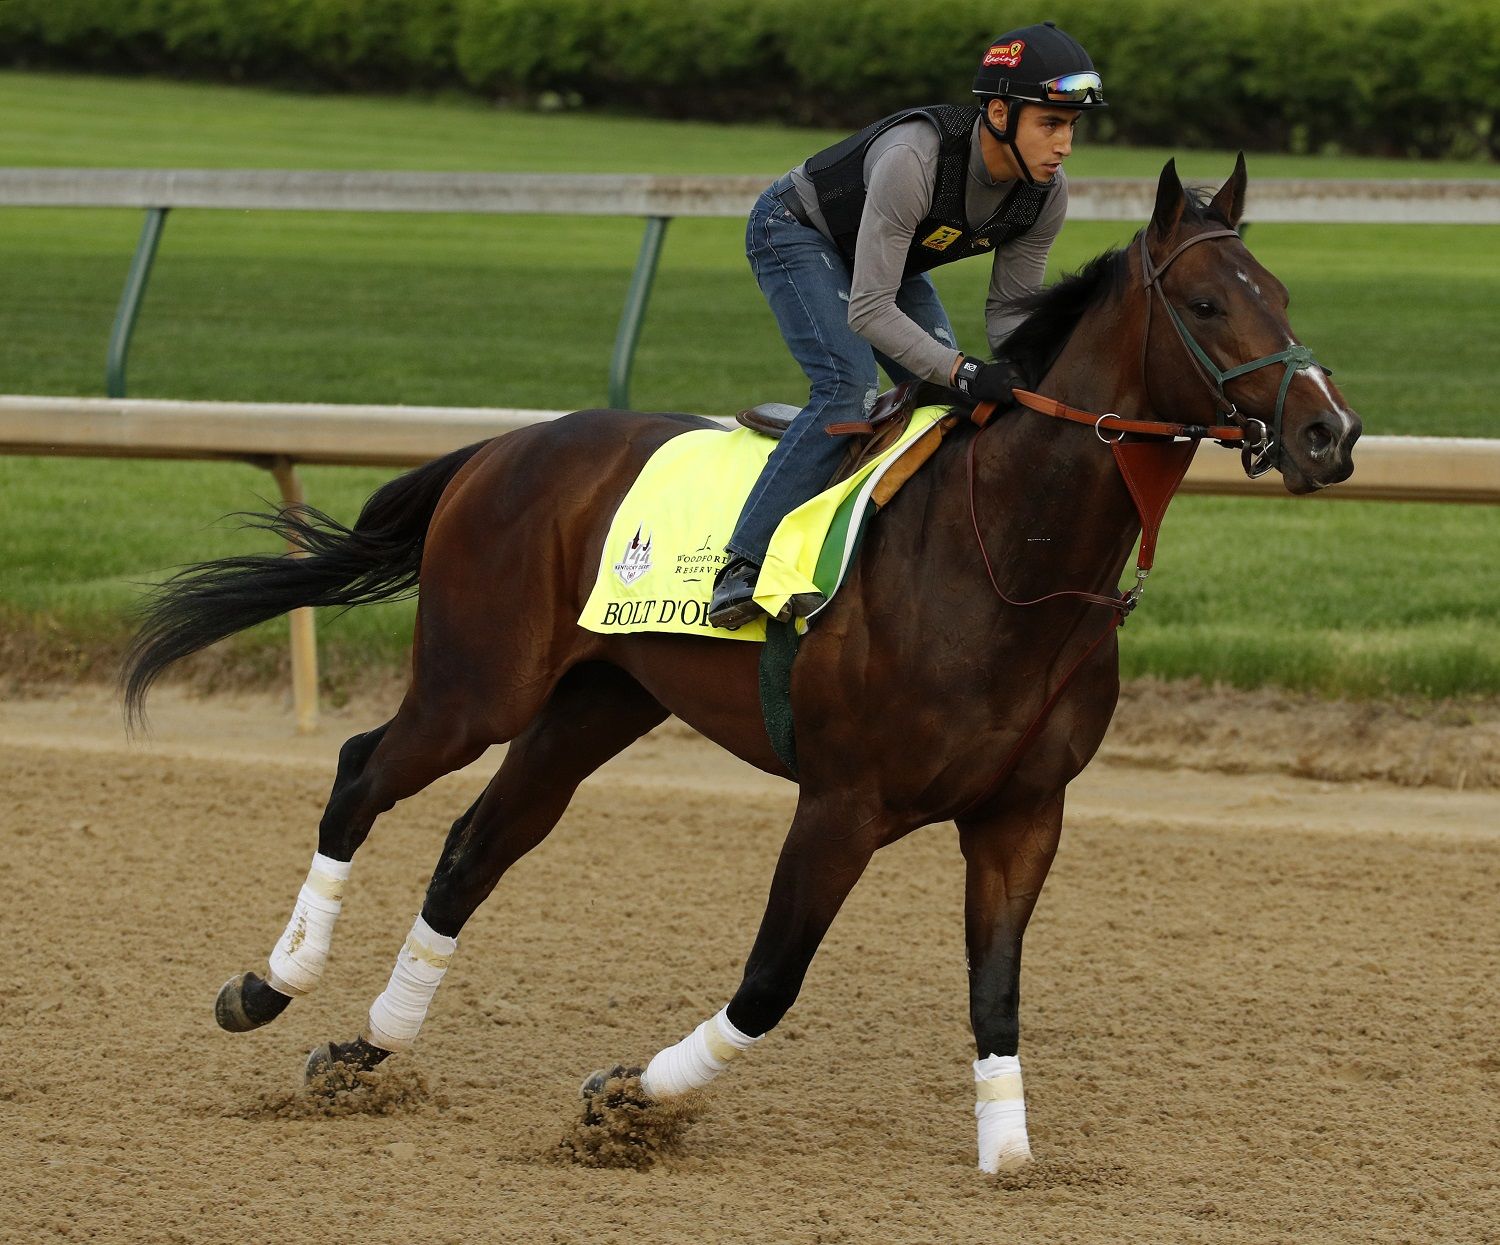 Kentucky Derby entrant Bolt d'Oro trains at Churchill Downs Thursday, May 3, 2018, in Louisville, Ky. The 144th running of the Kentucky Derby is scheduled for Saturday, May 5. (AP Photo/Charlie Riedel)